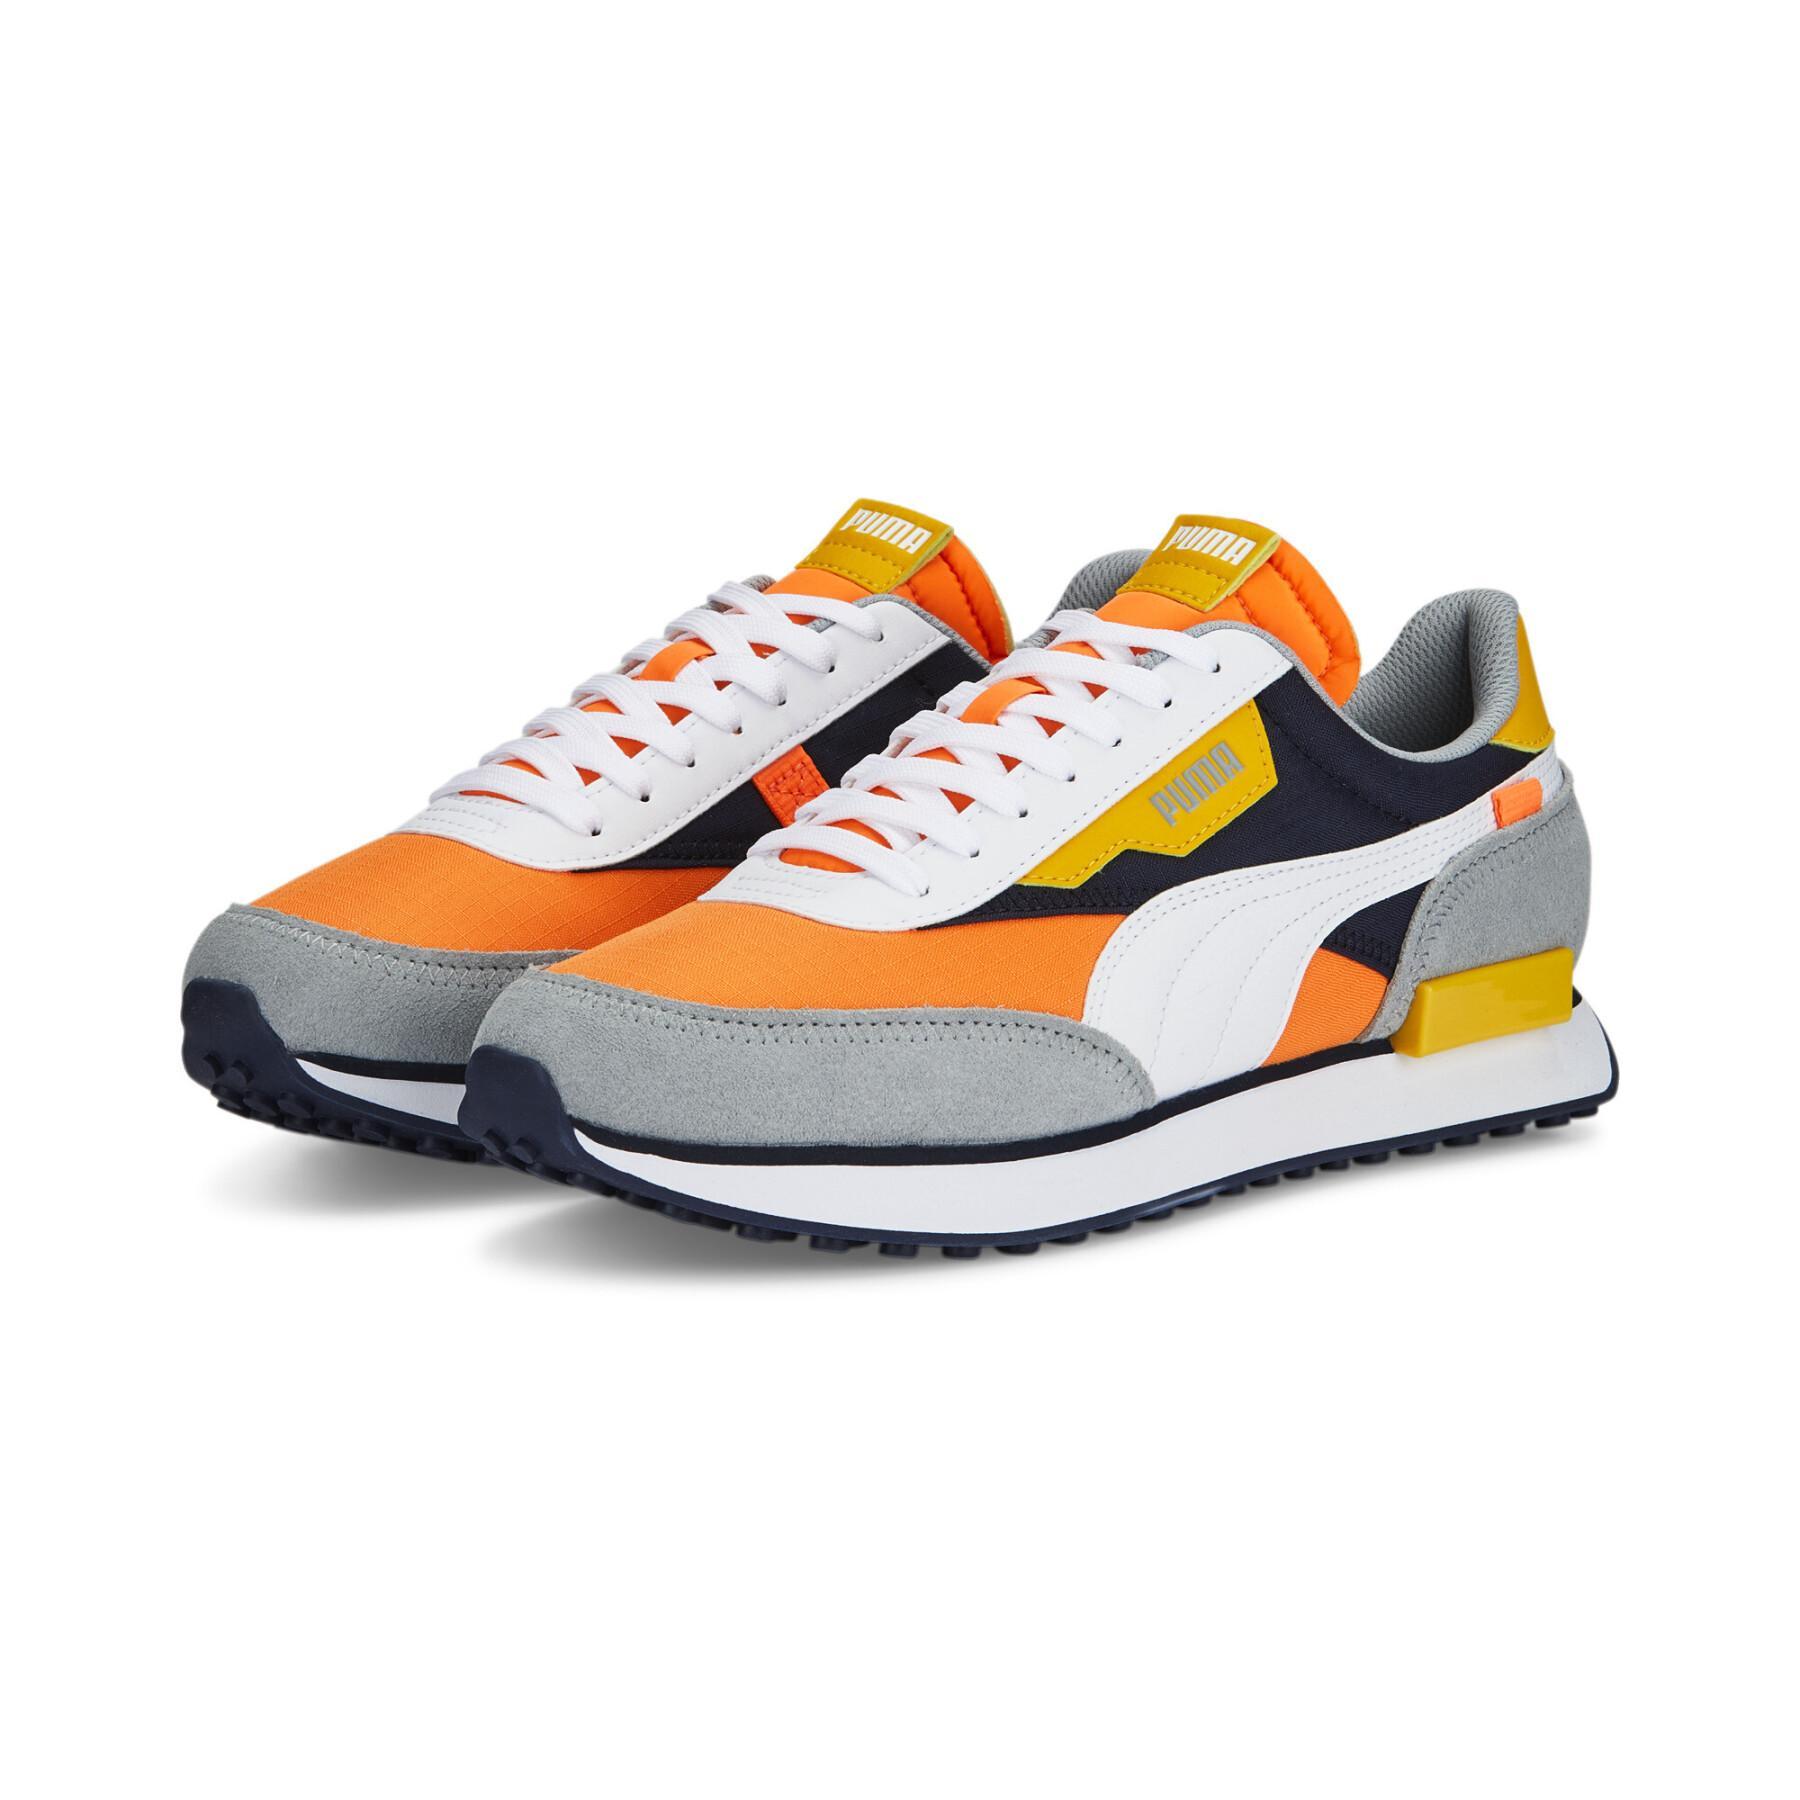 Sneakers Puma Rider Play On